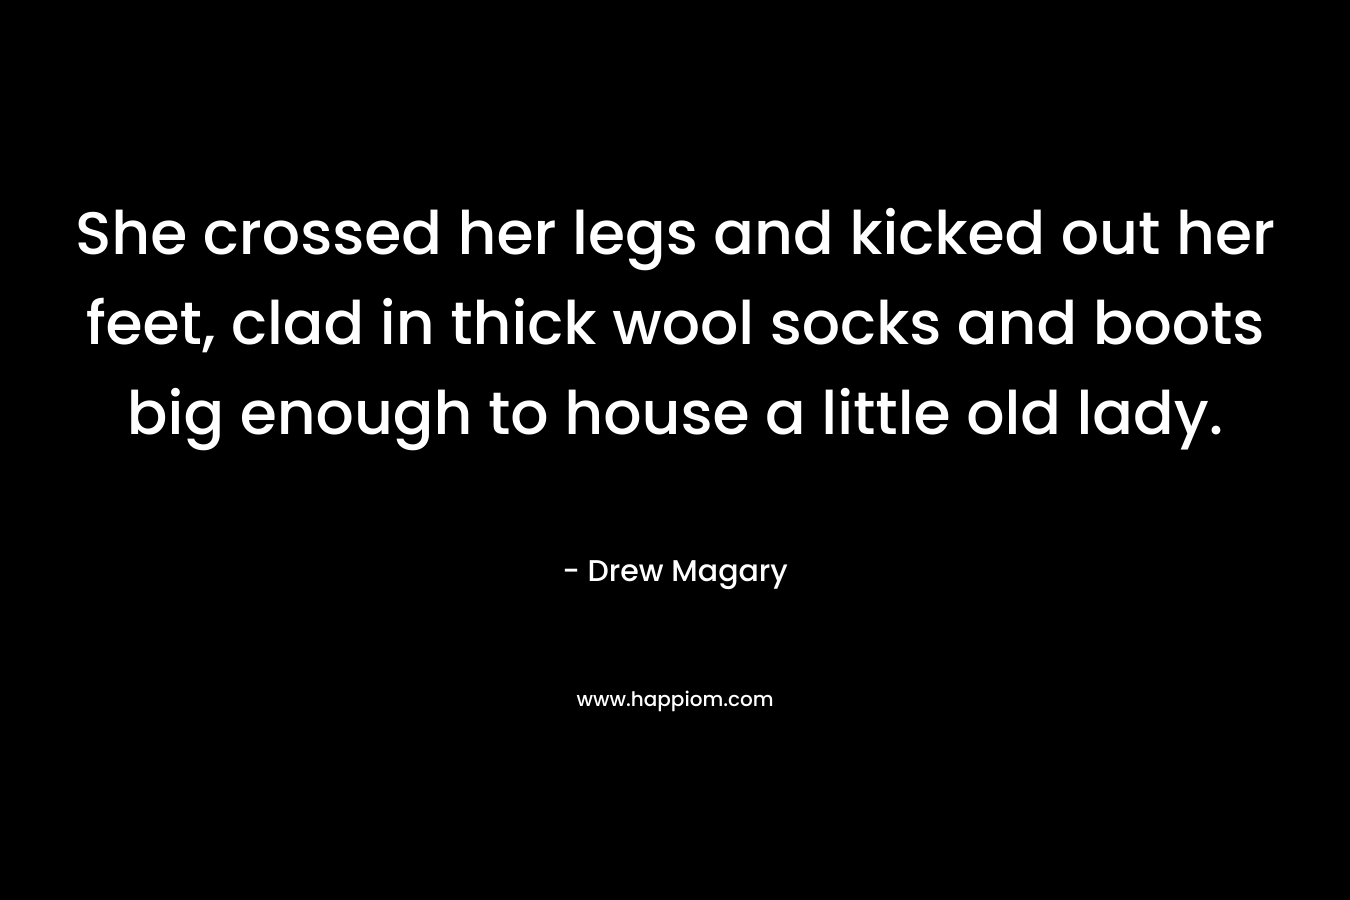 She crossed her legs and kicked out her feet, clad in thick wool socks and boots big enough to house a little old lady. – Drew Magary